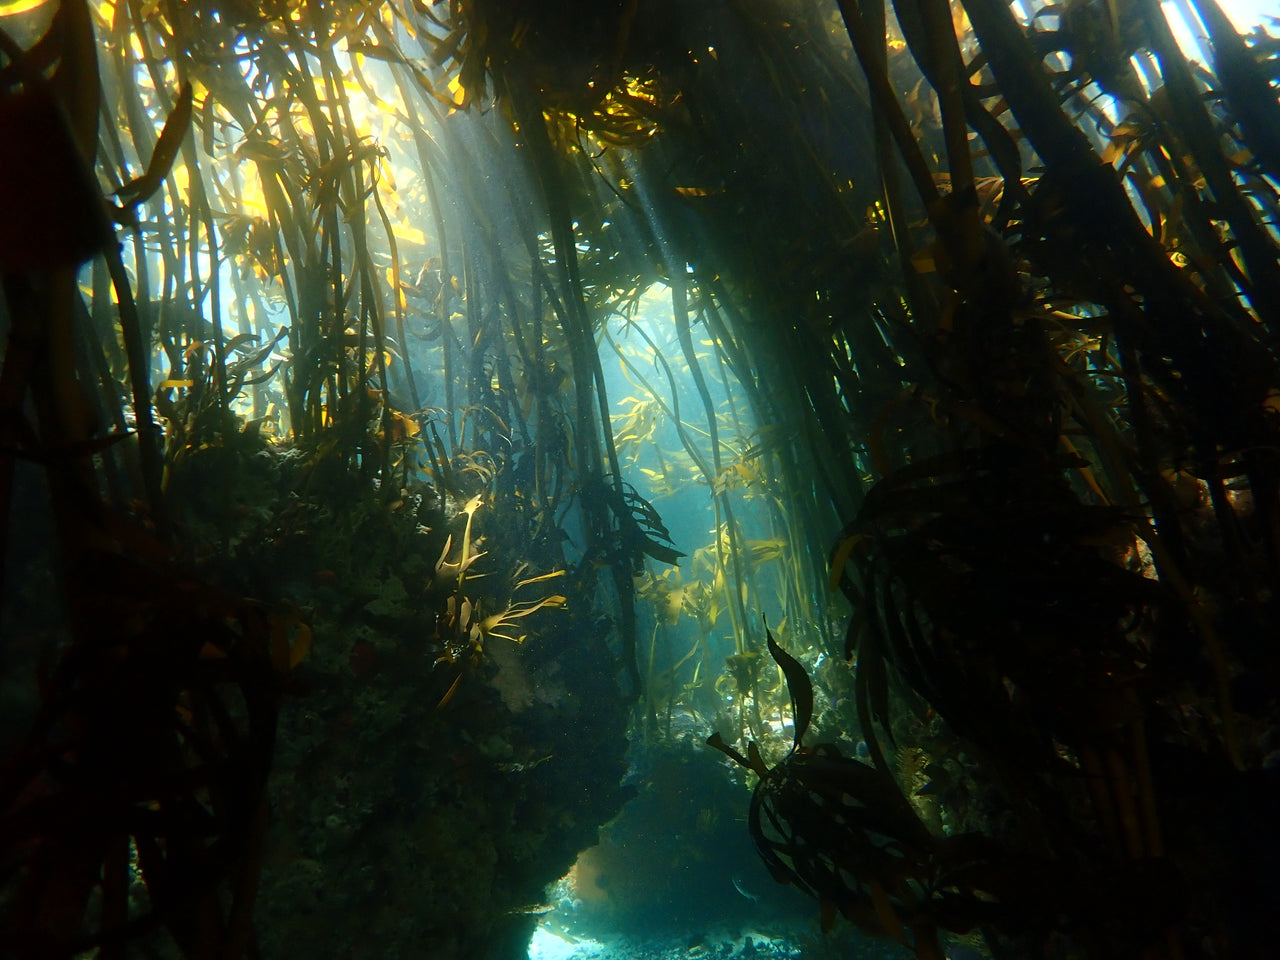 Photographer : Keri Muller - An image of the underwater Kelp forests in False Bay in Cape Town.